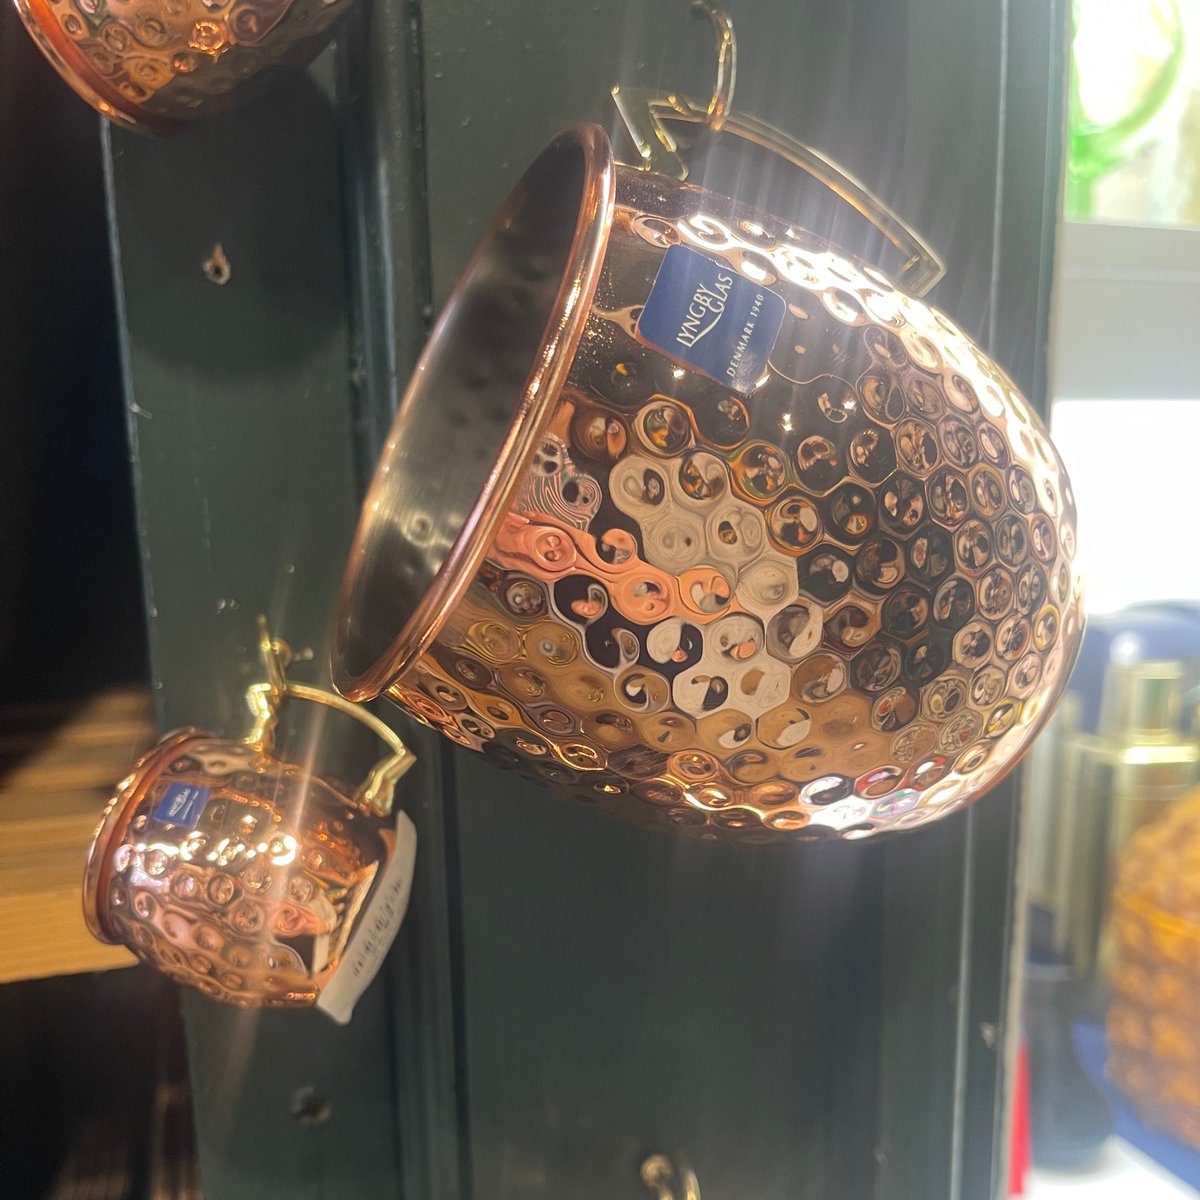 Did you know ⁉️ Copper improves brain and heart health and also has an antibacterial effect. #trevormottram #tunbridgewells #kent #thepantiles #homeofcooking